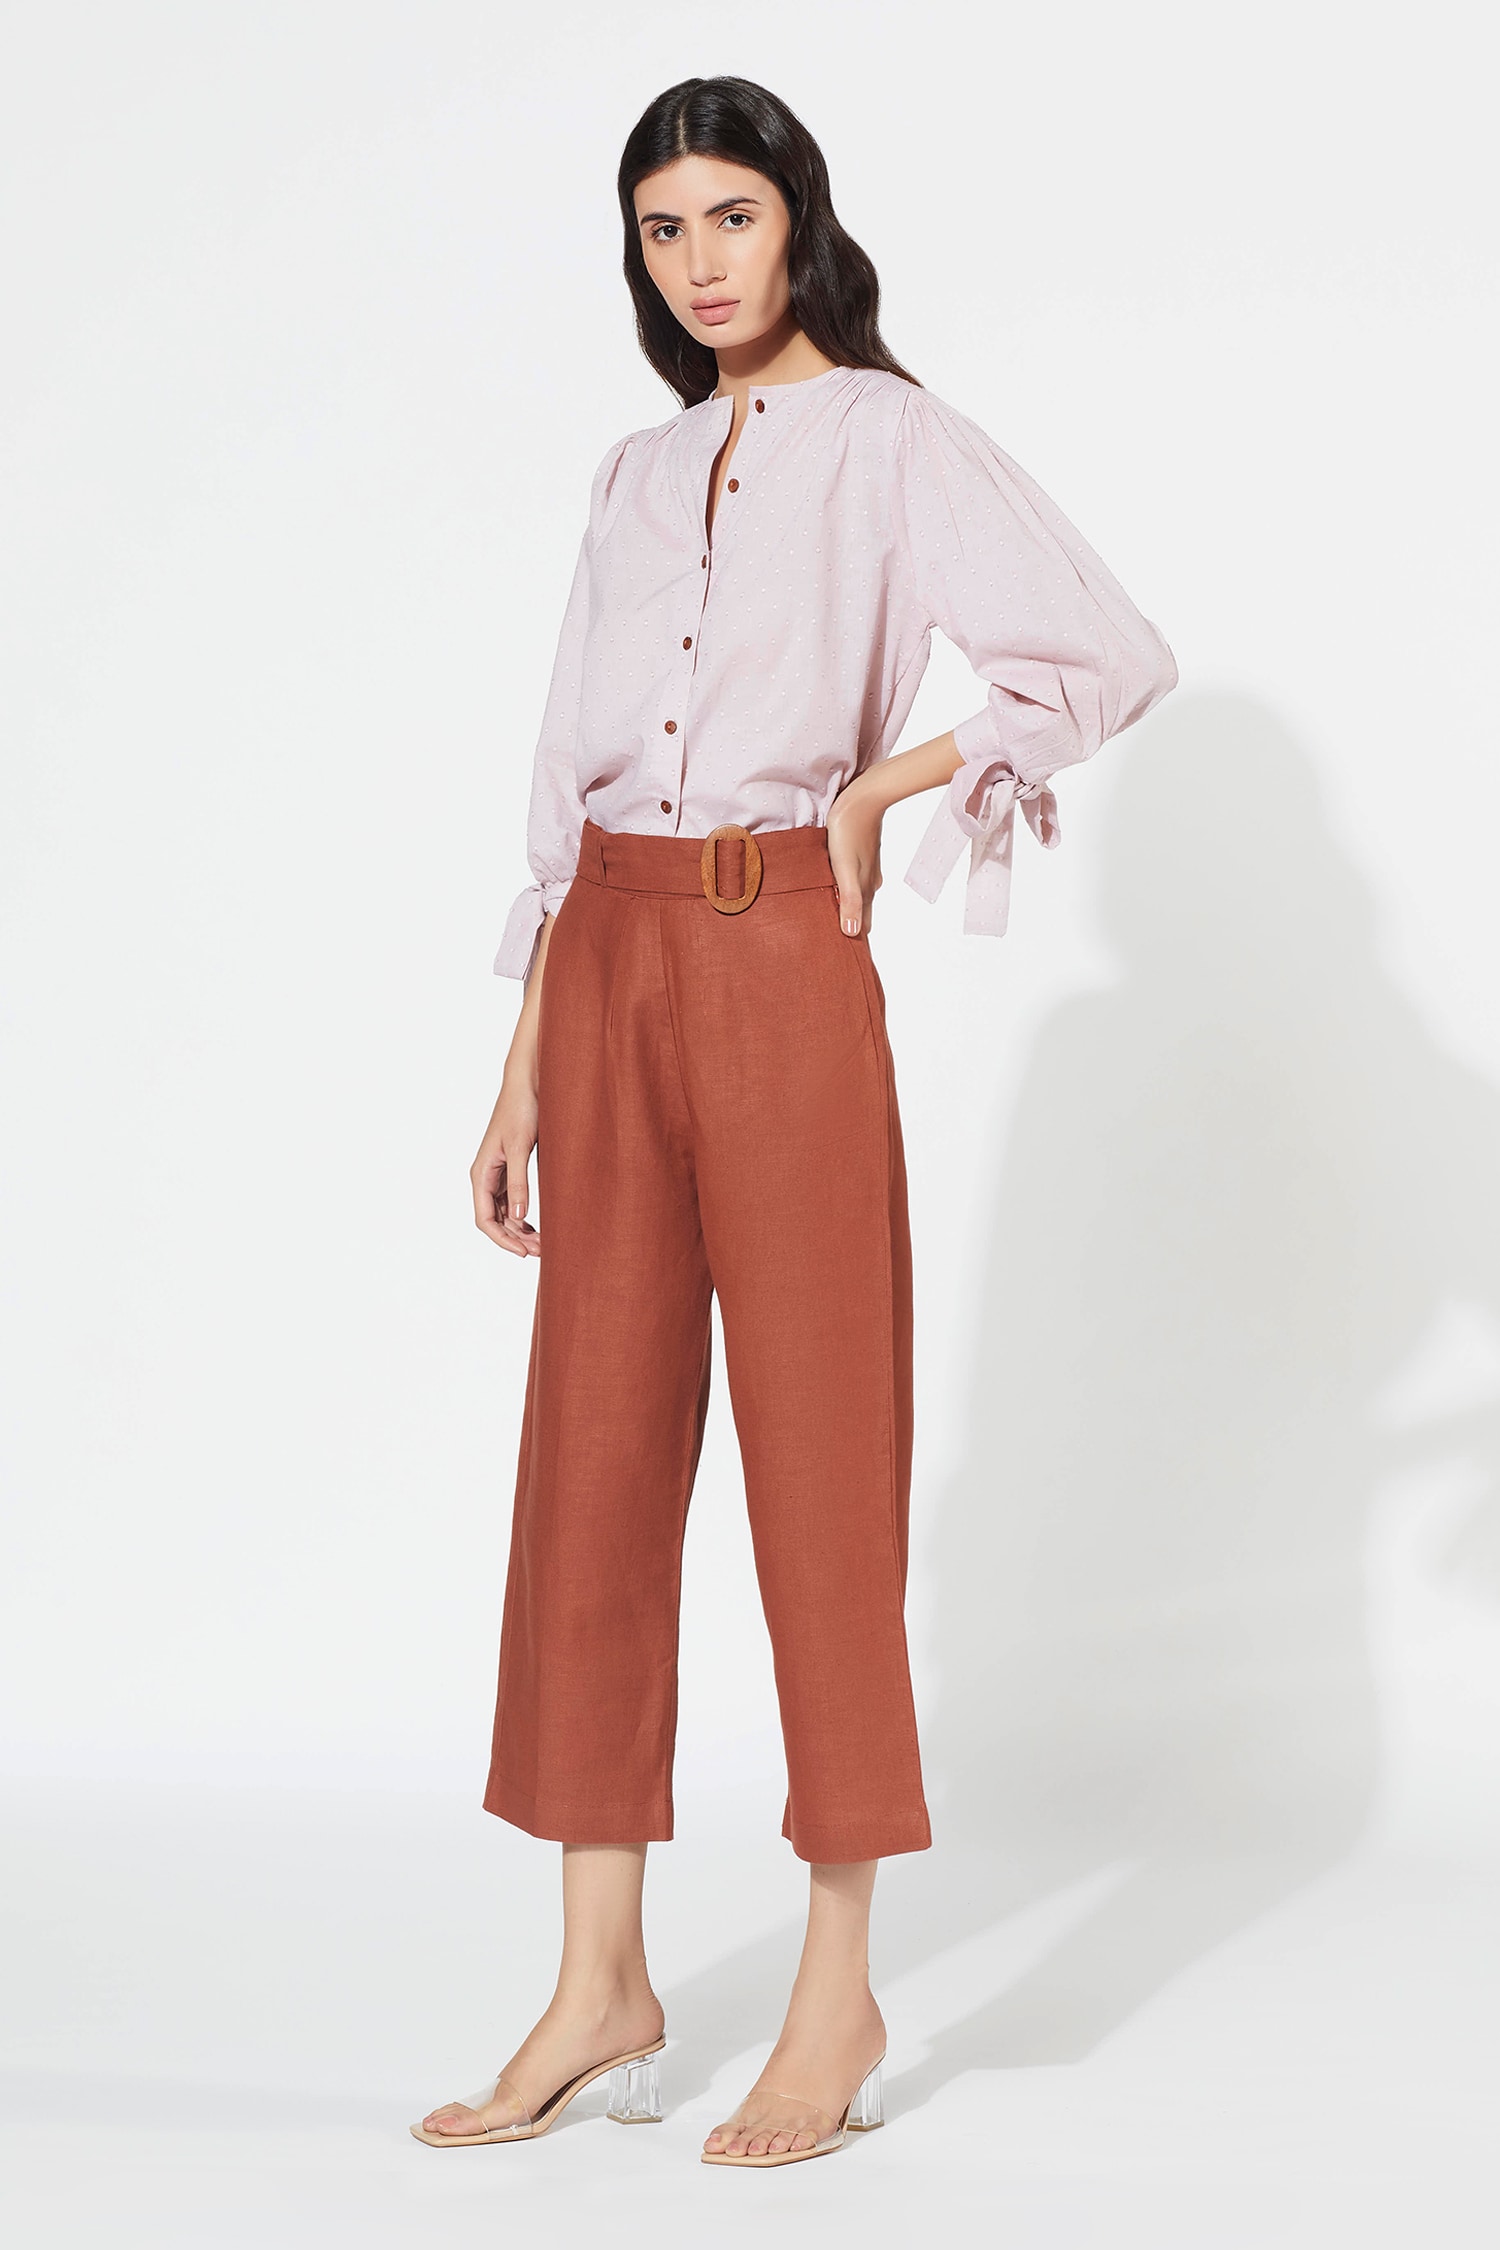 Buy Linen Pants Elastic Cuff Pants Jogger Pants for Women Online in India   Etsy